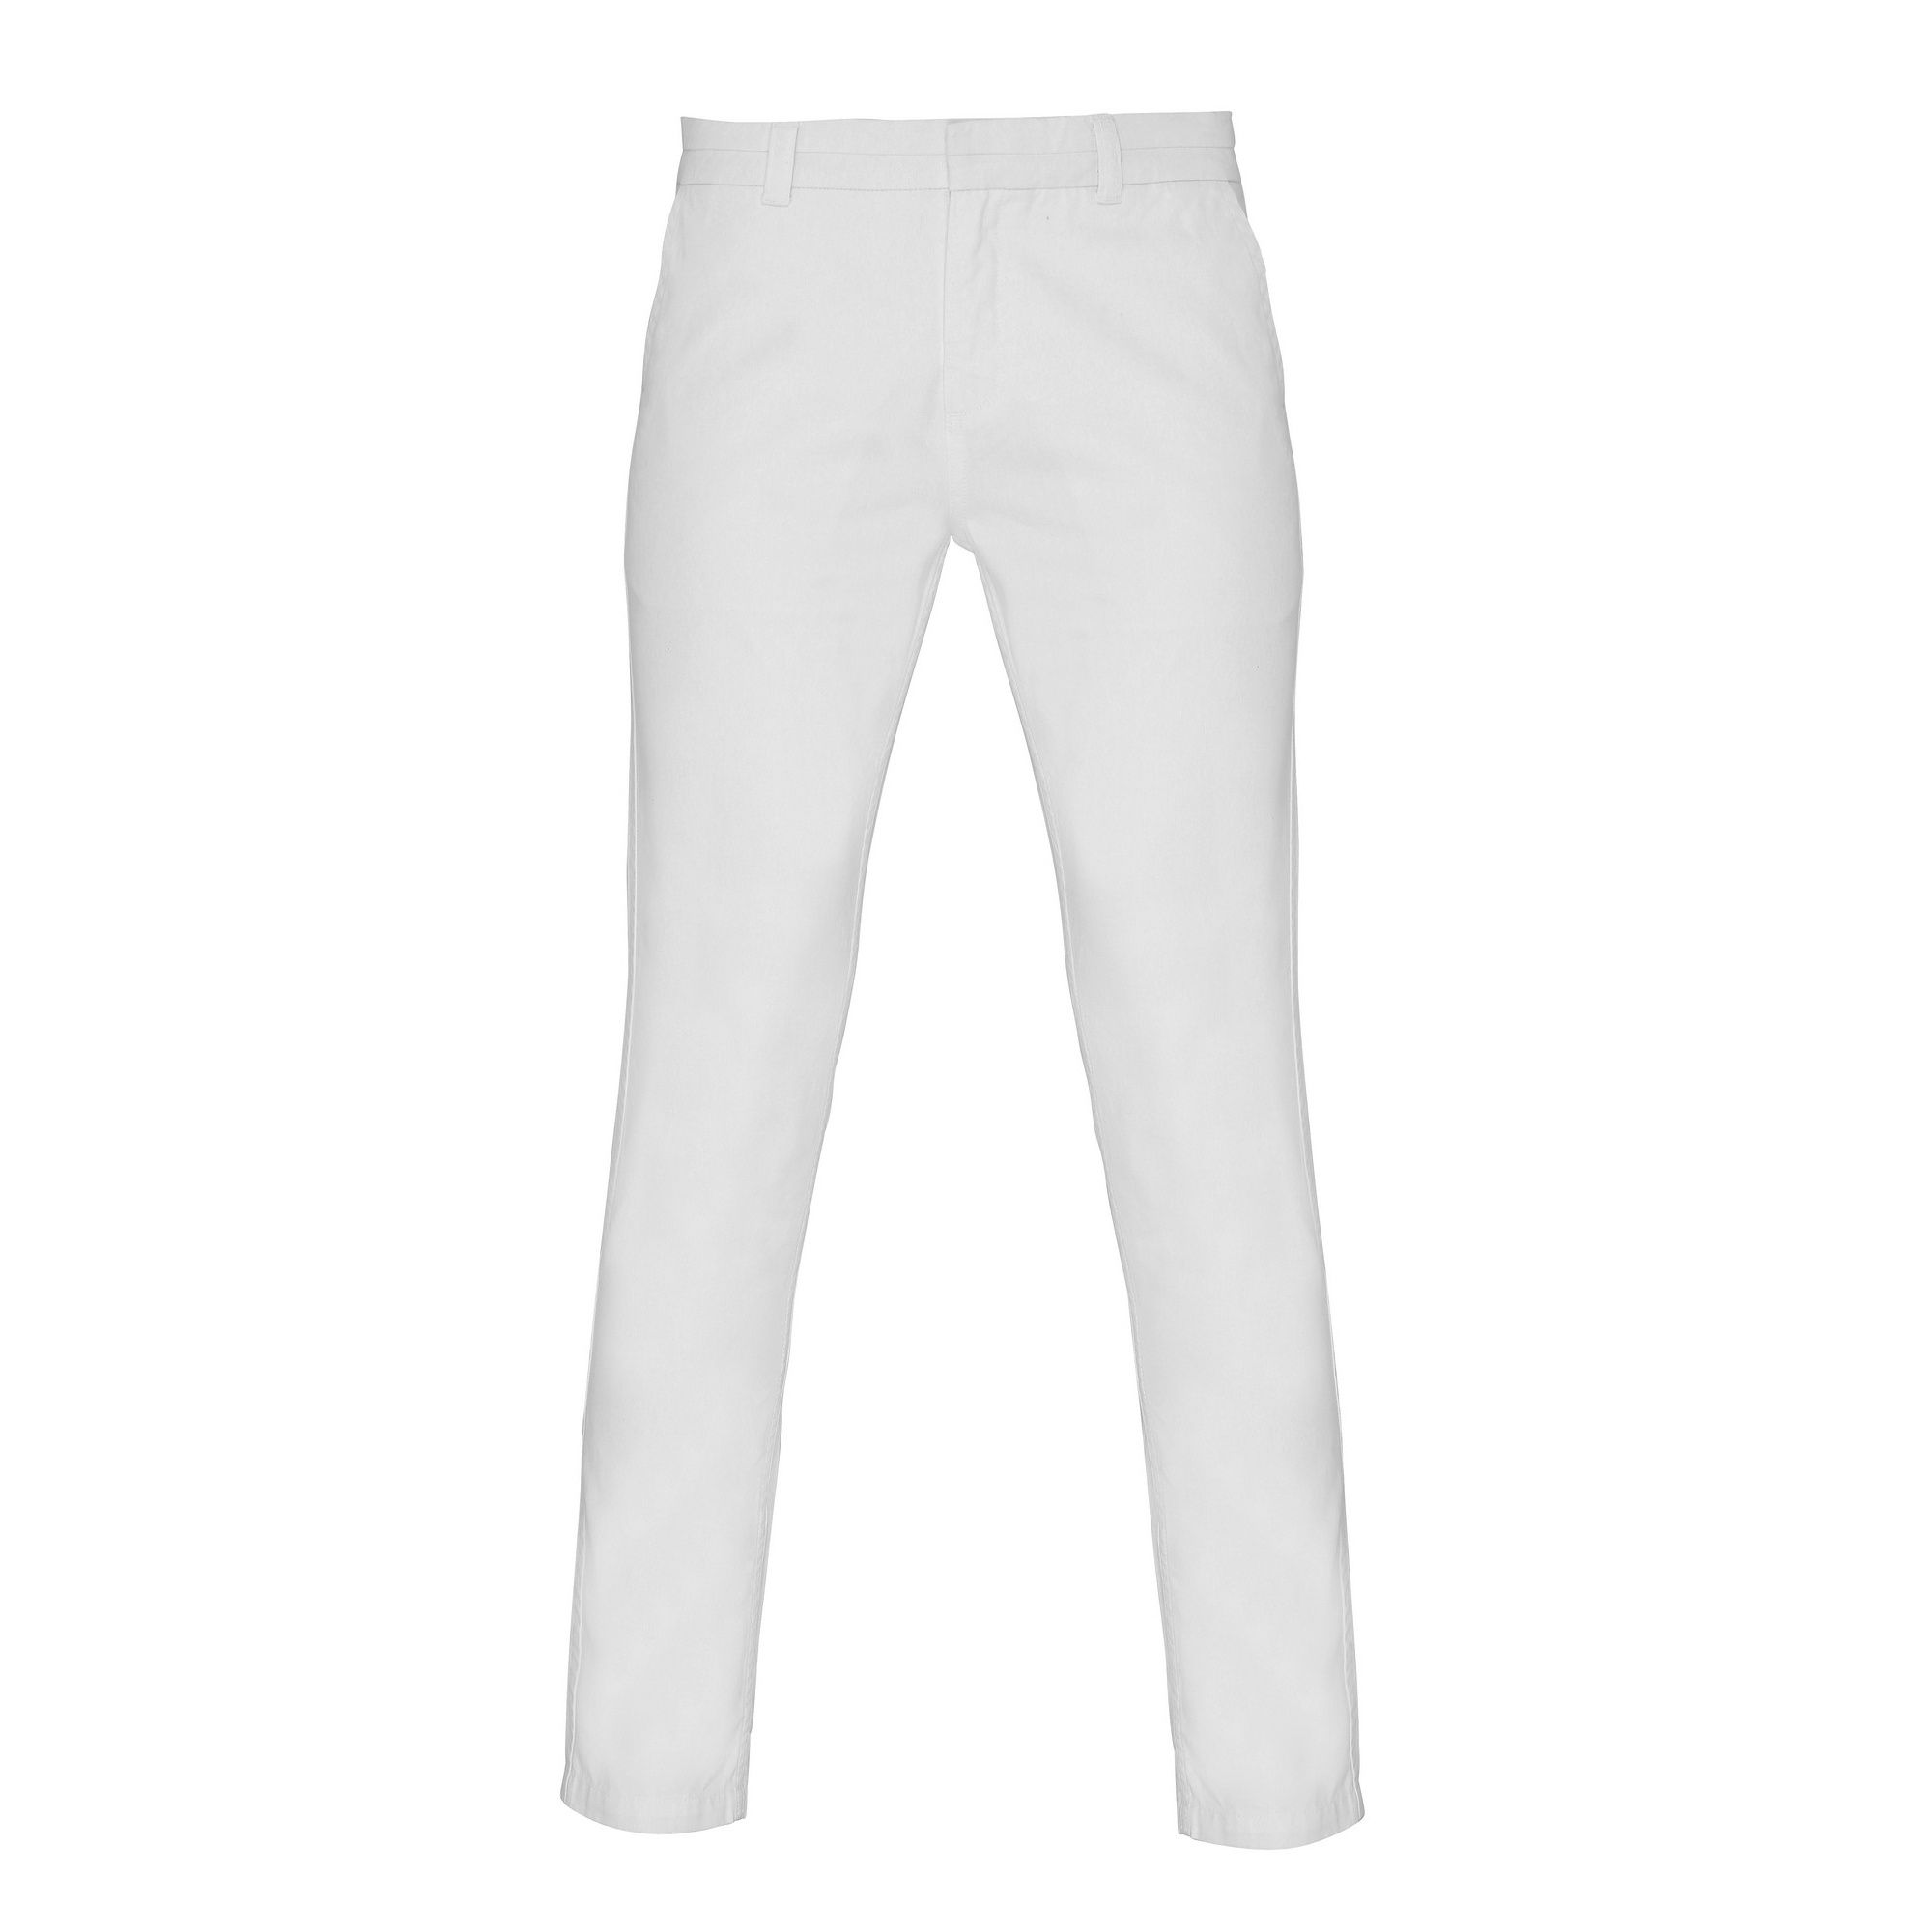 Asquith & Fox Womens/Ladies Casual Chino Trousers (White)